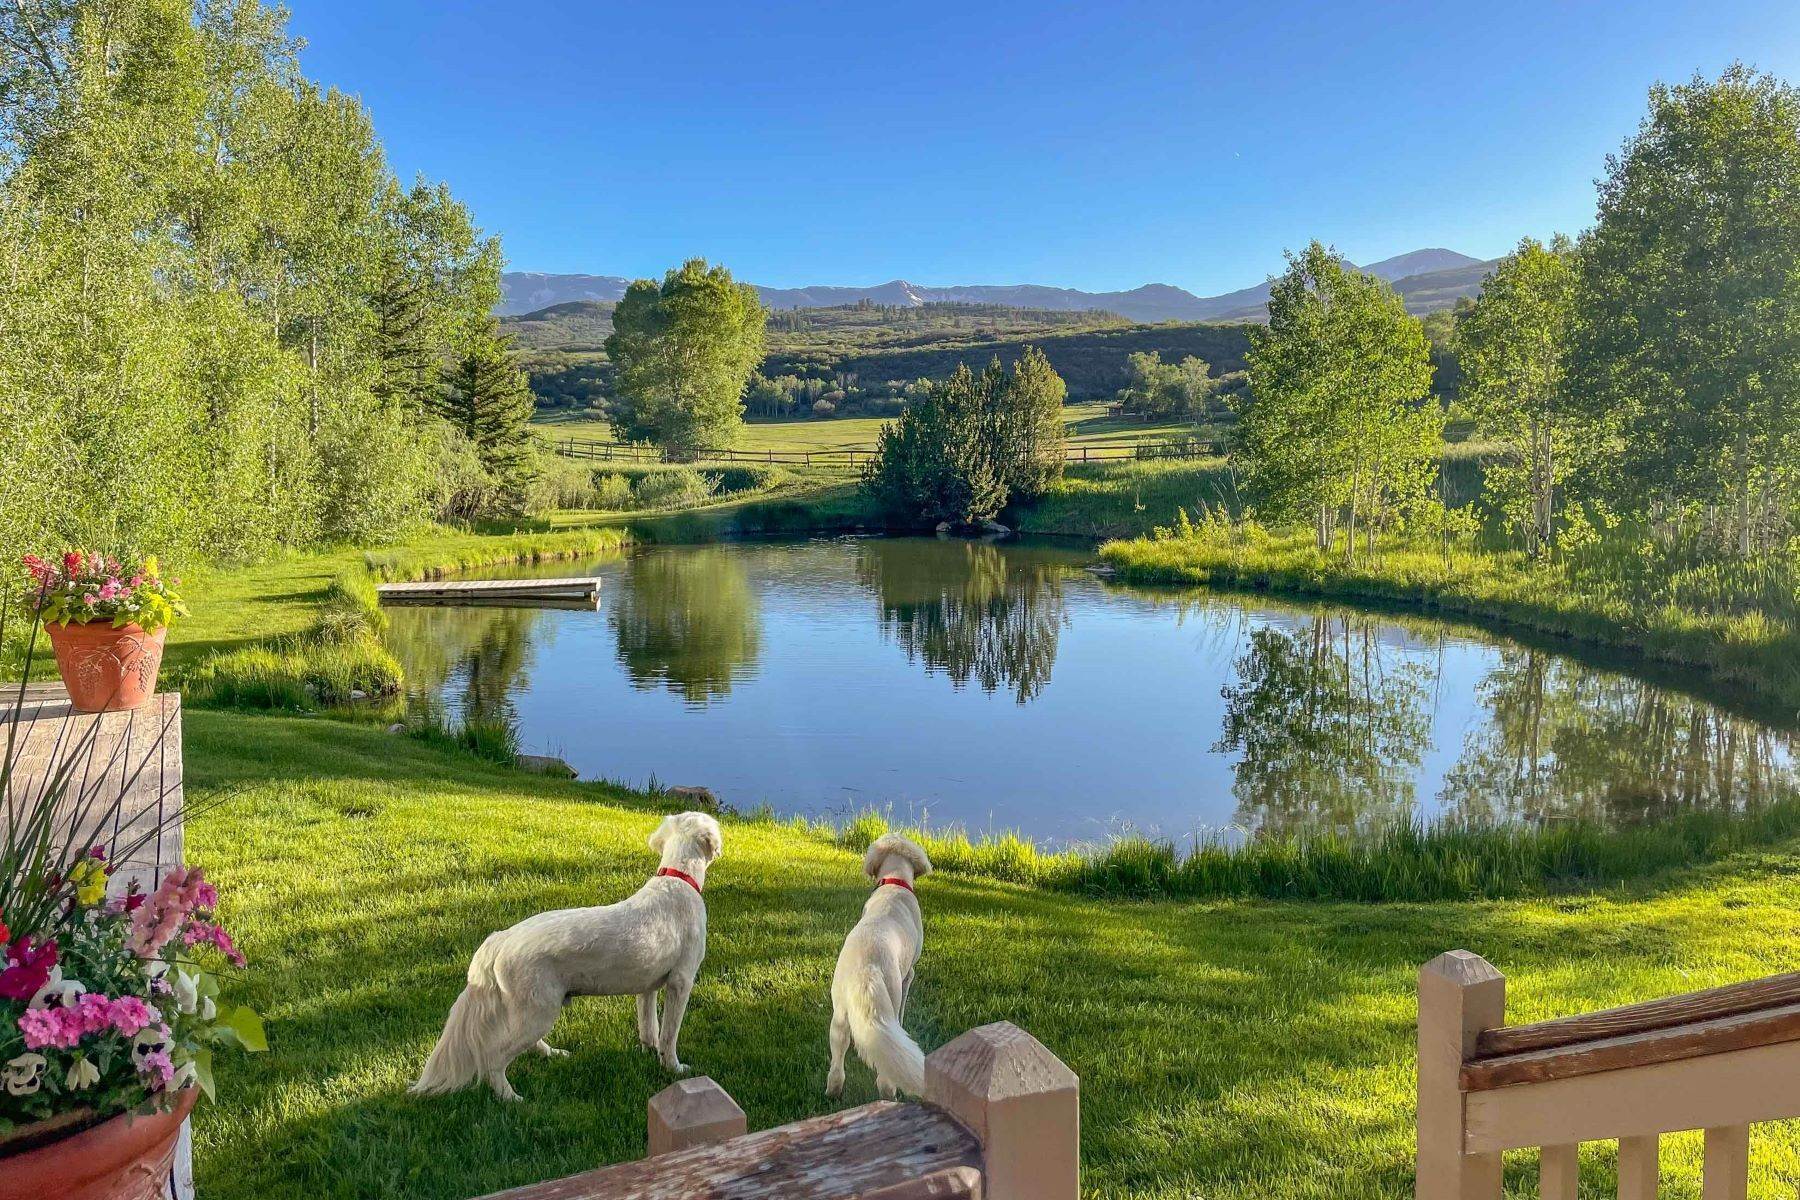 Farm and Ranch Properties for Sale at RARE and UNIQUE opportunity to own the heart of the renowned McCabe Ranch! 1321 Elk Creek & TBD McCabe Ranch Road Old Snowmass, Colorado 81654 United States